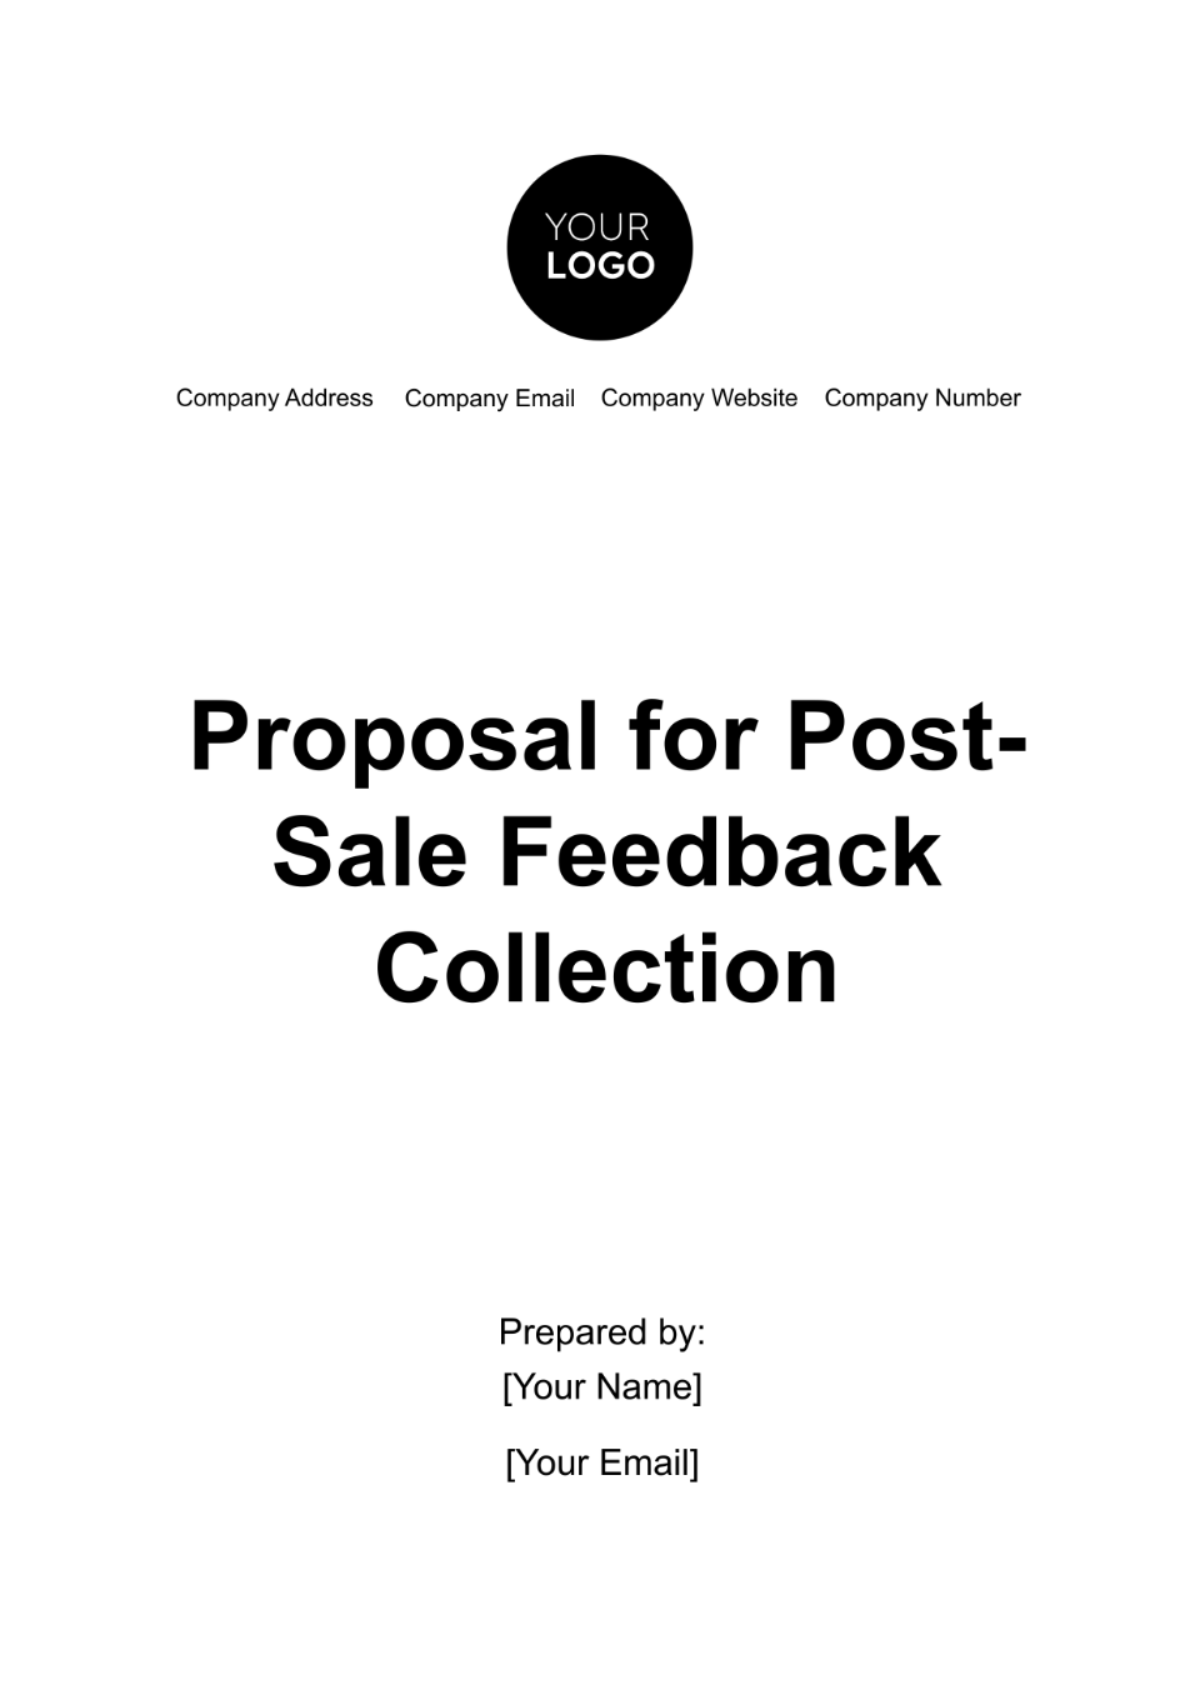 Proposal for Post-Sale Feedback Collection Template